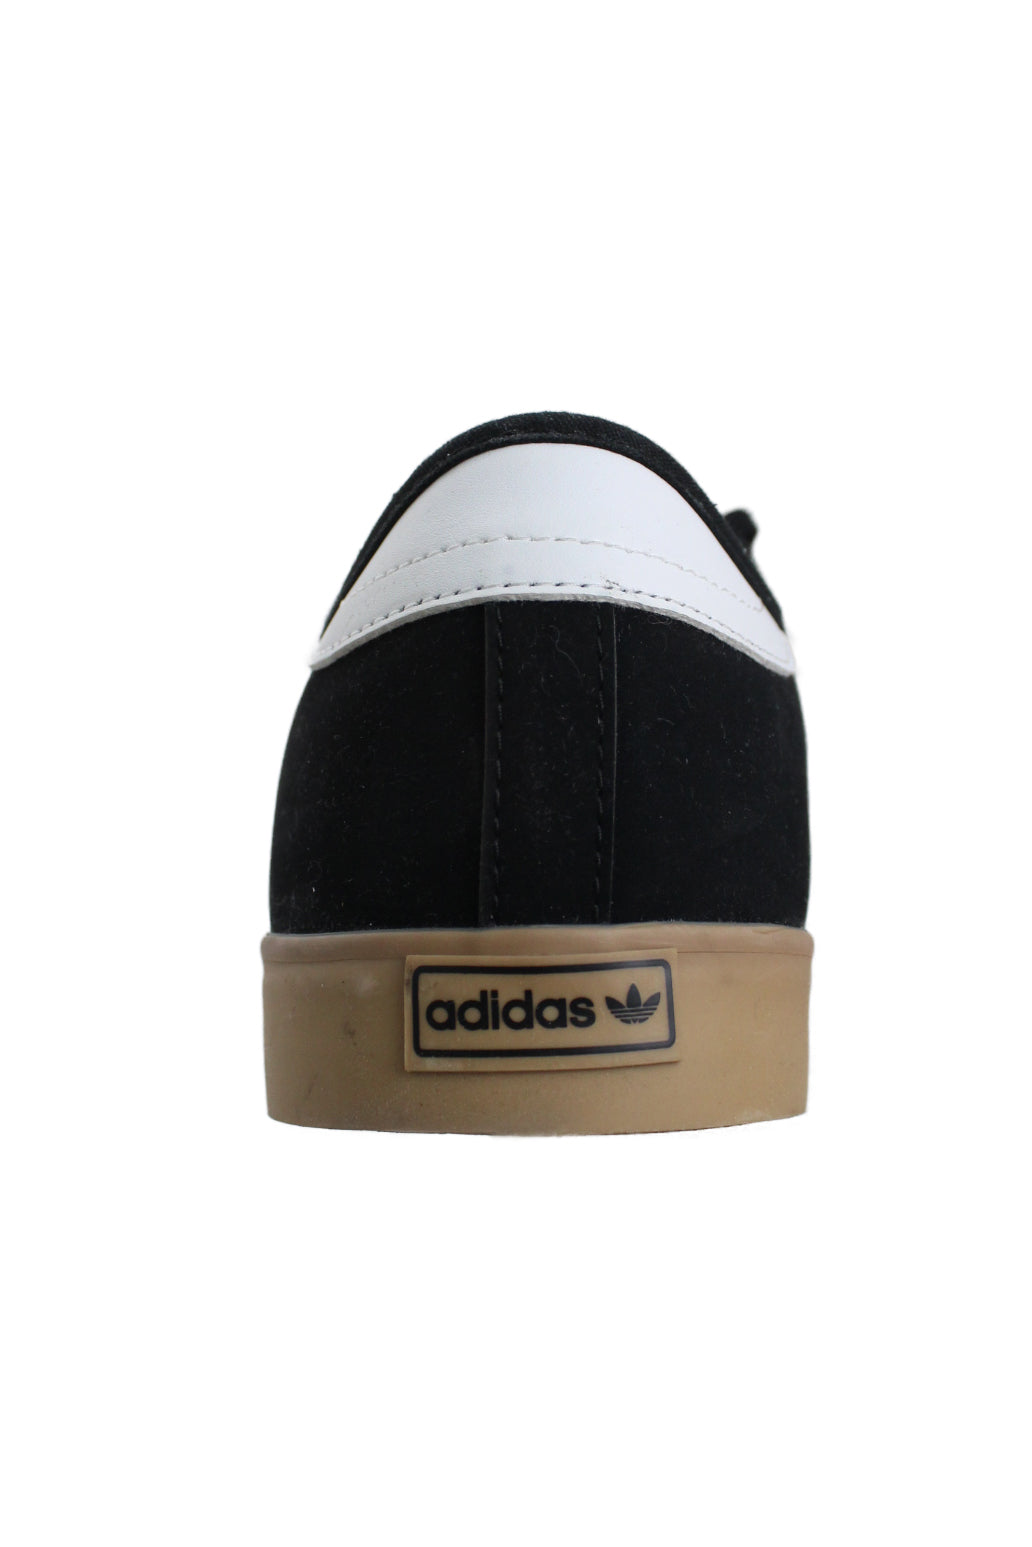 back angle of adidas shoes. features text 'adidas' on rubber sole. 